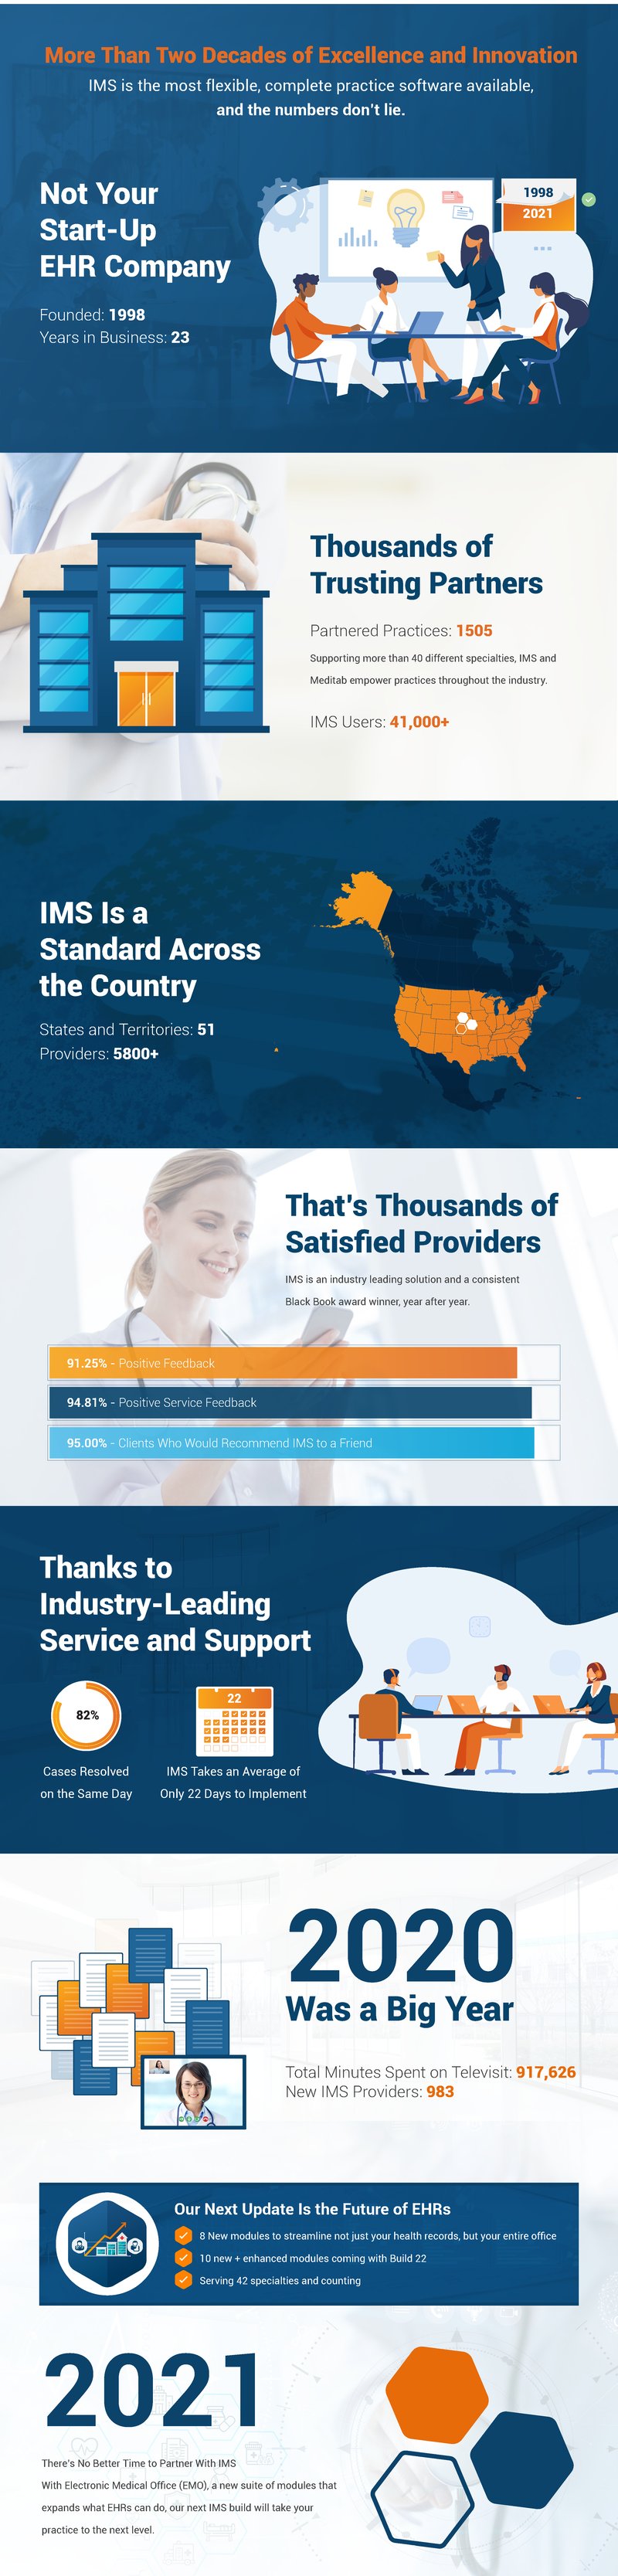 An Infographic showing how Meditab and IMS are the best EHR